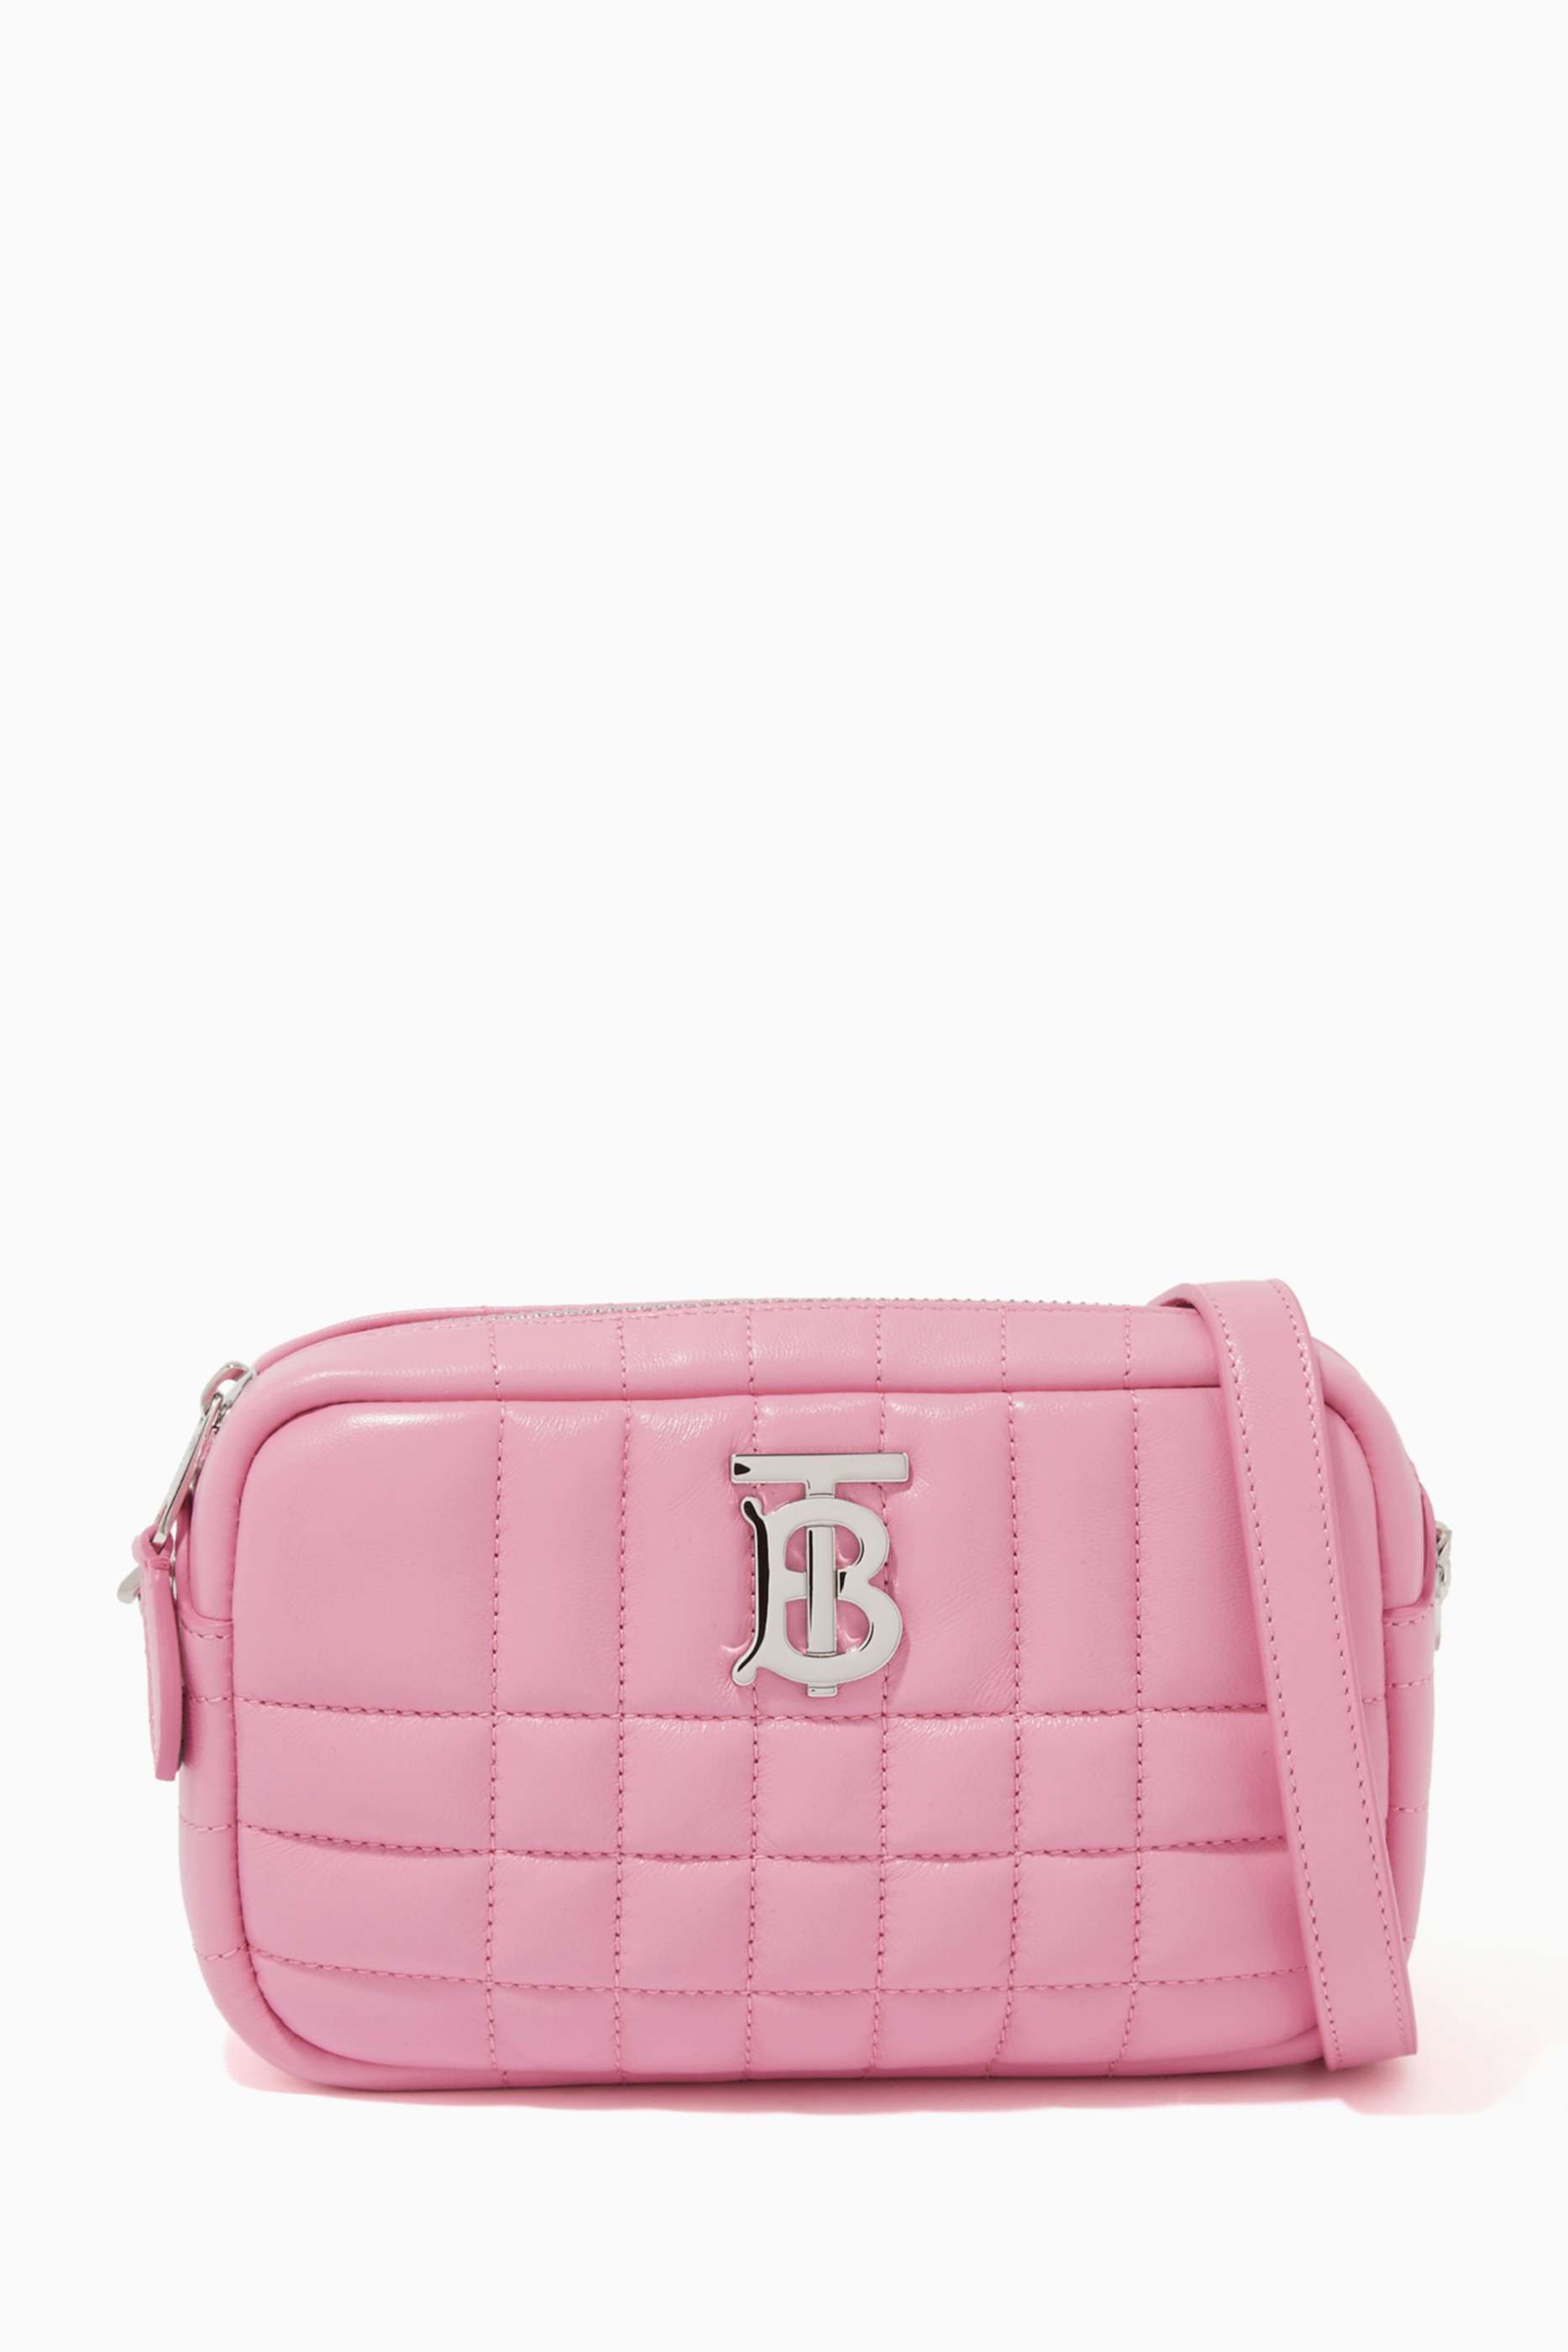 Shop Burberry Pink Mini Lola Camera Bag in Quilted Lambskin for 